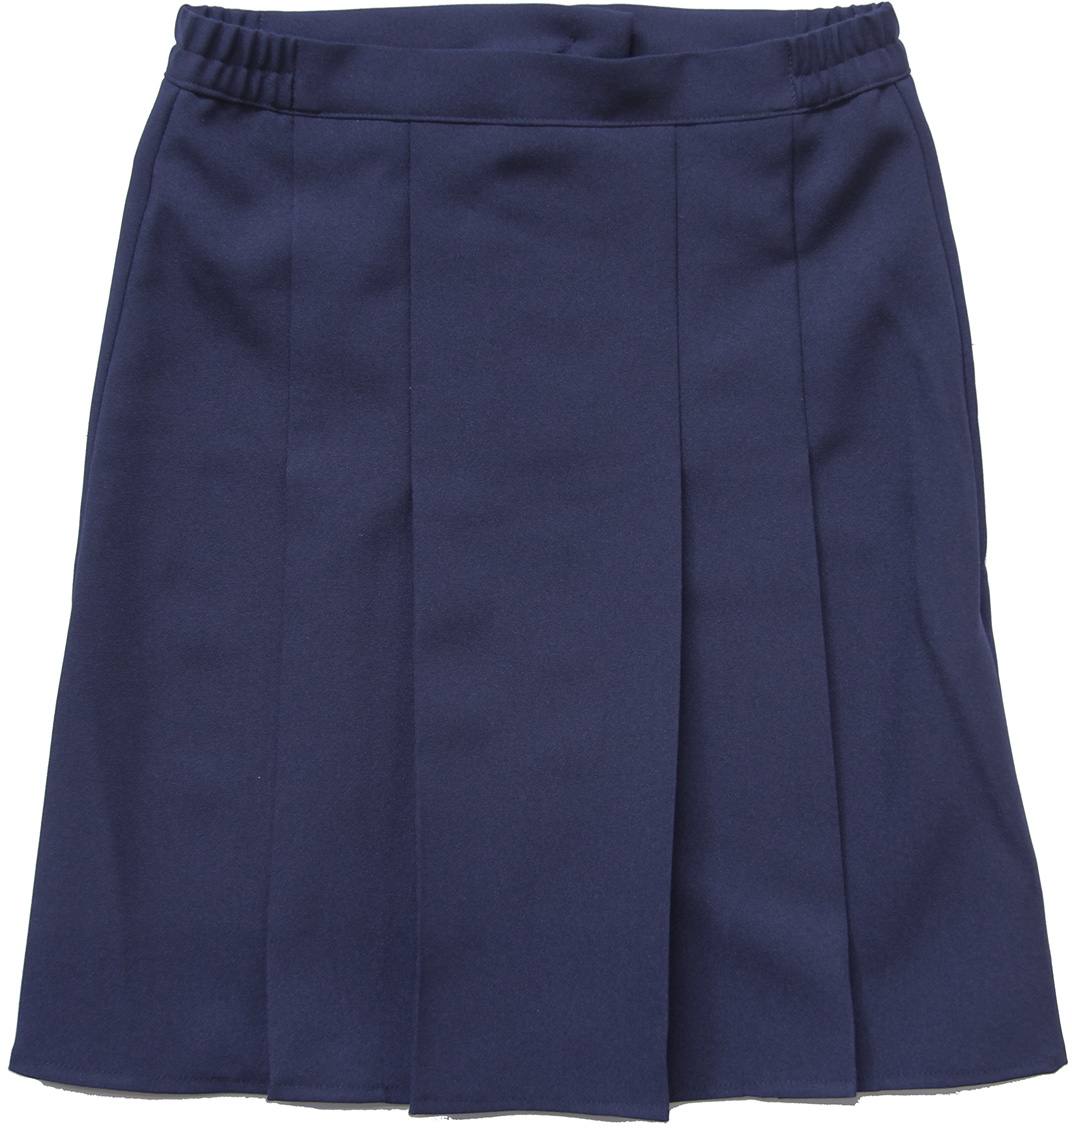 Partiotuote Scout skirt girl’s sizes Blue 140 cm